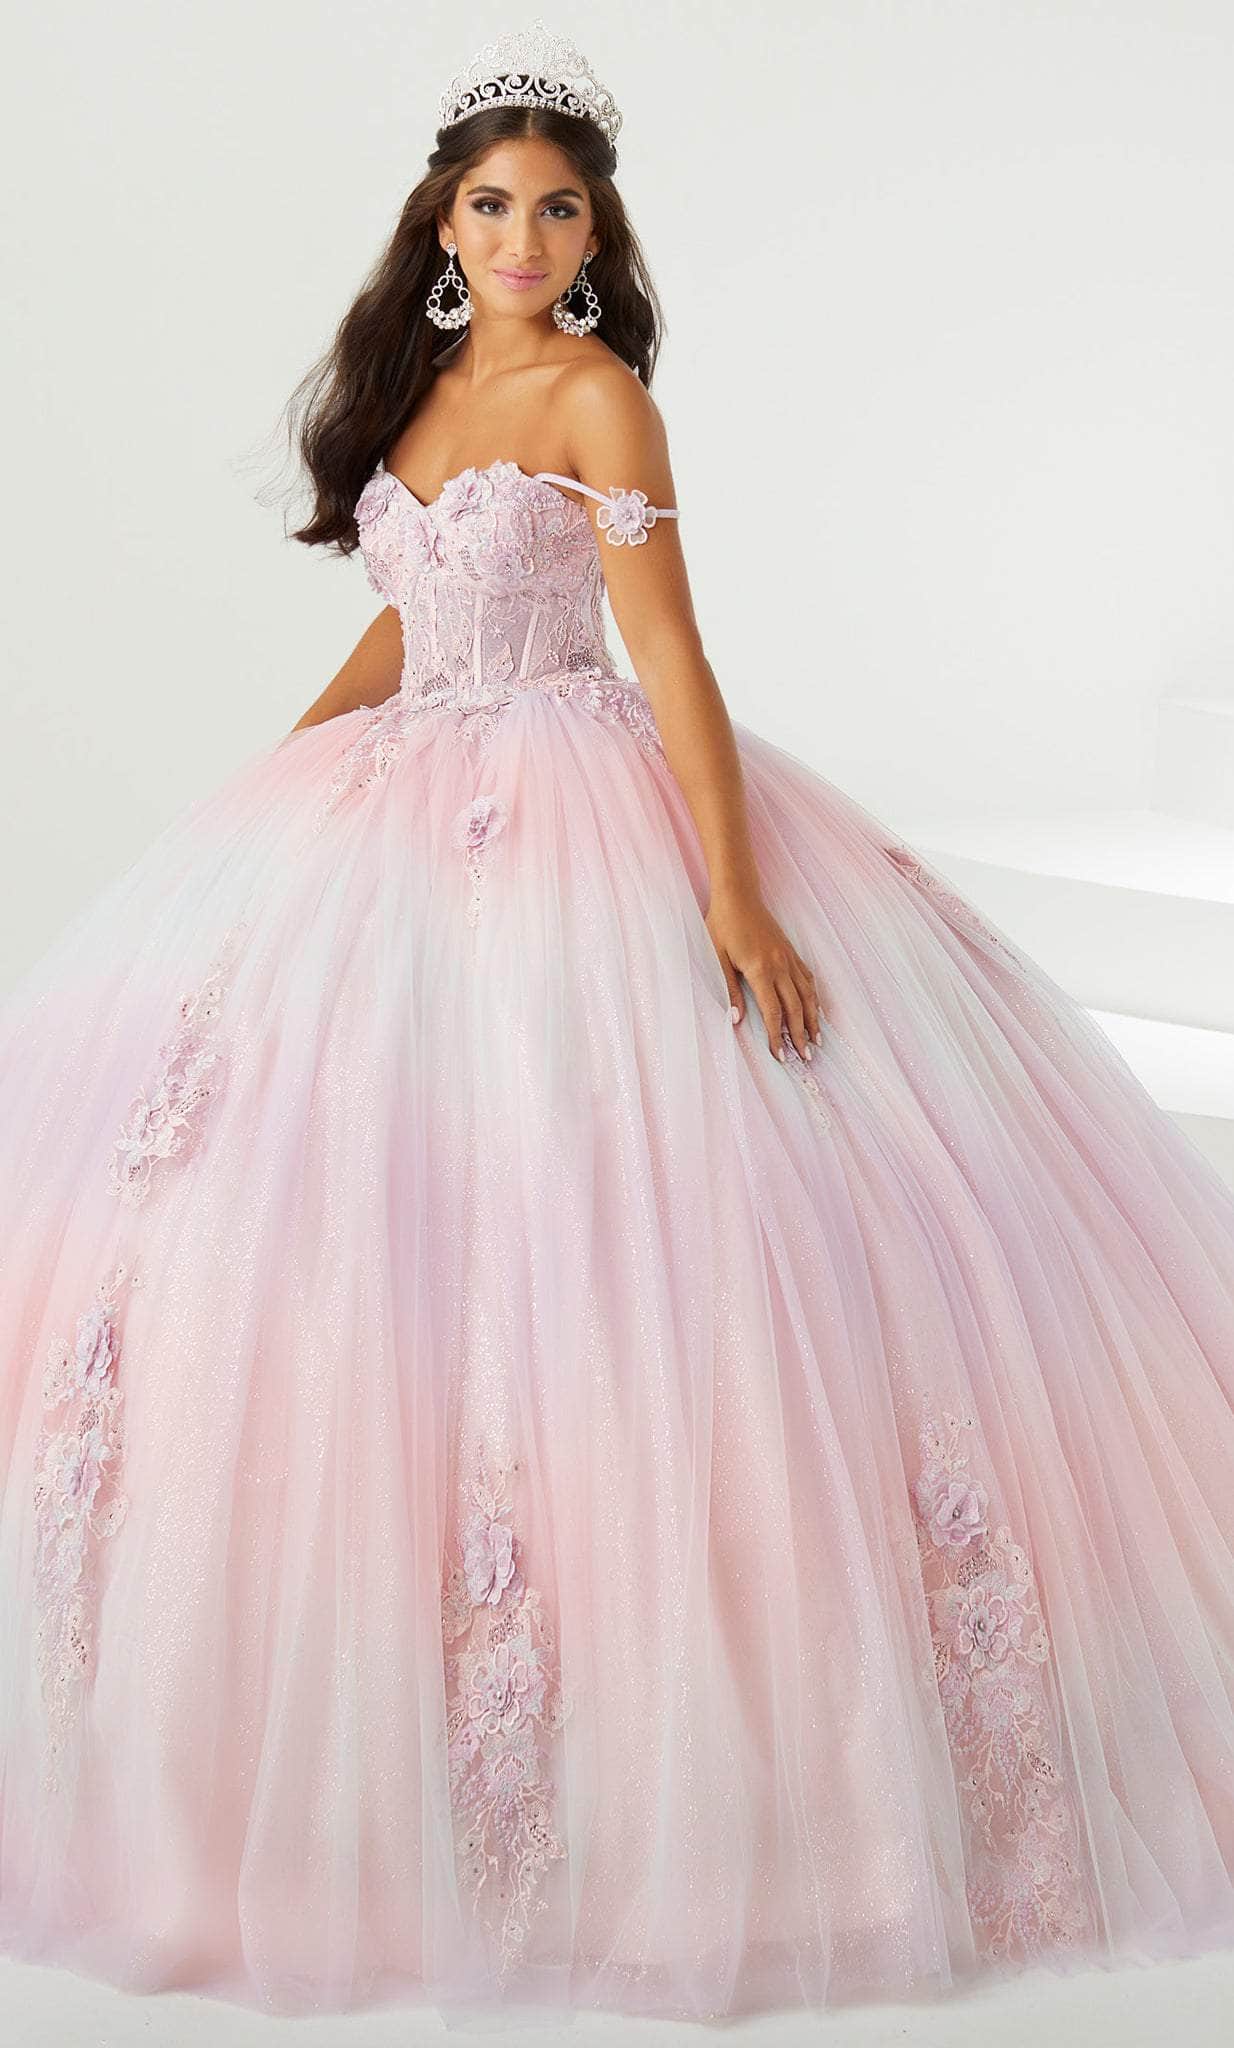 Image of Fiesta Gowns 56469 - Thin Strapped Glittery Ball Gown